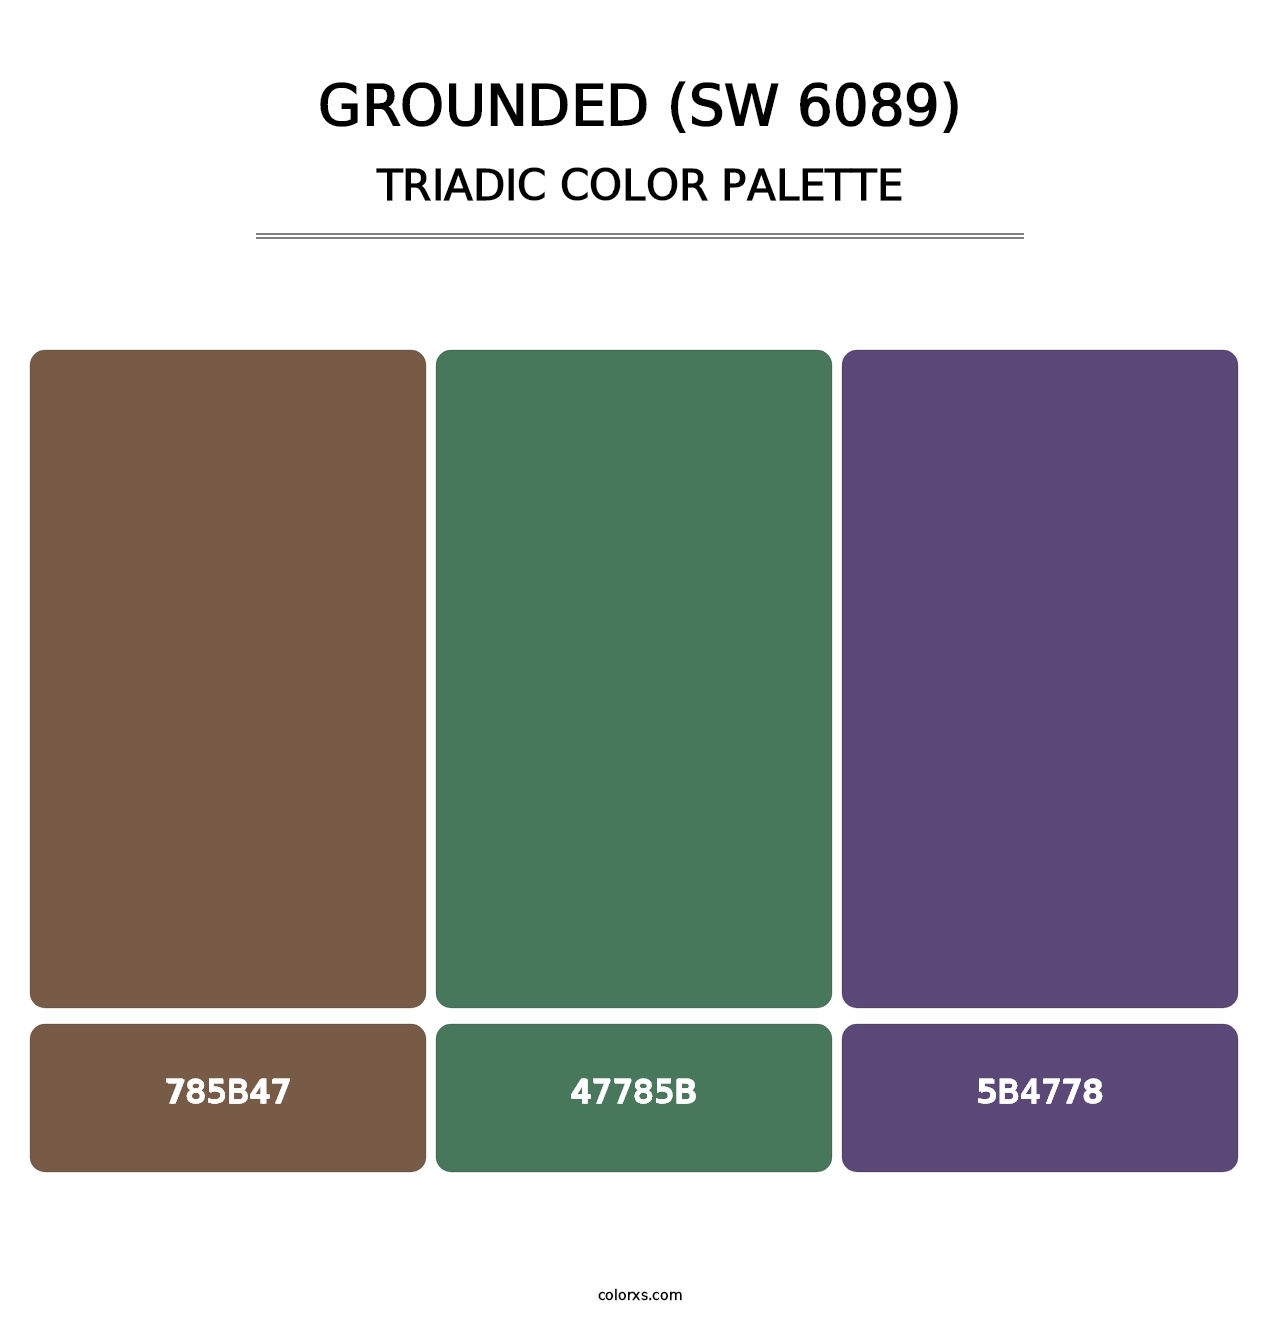 Grounded (SW 6089) - Triadic Color Palette